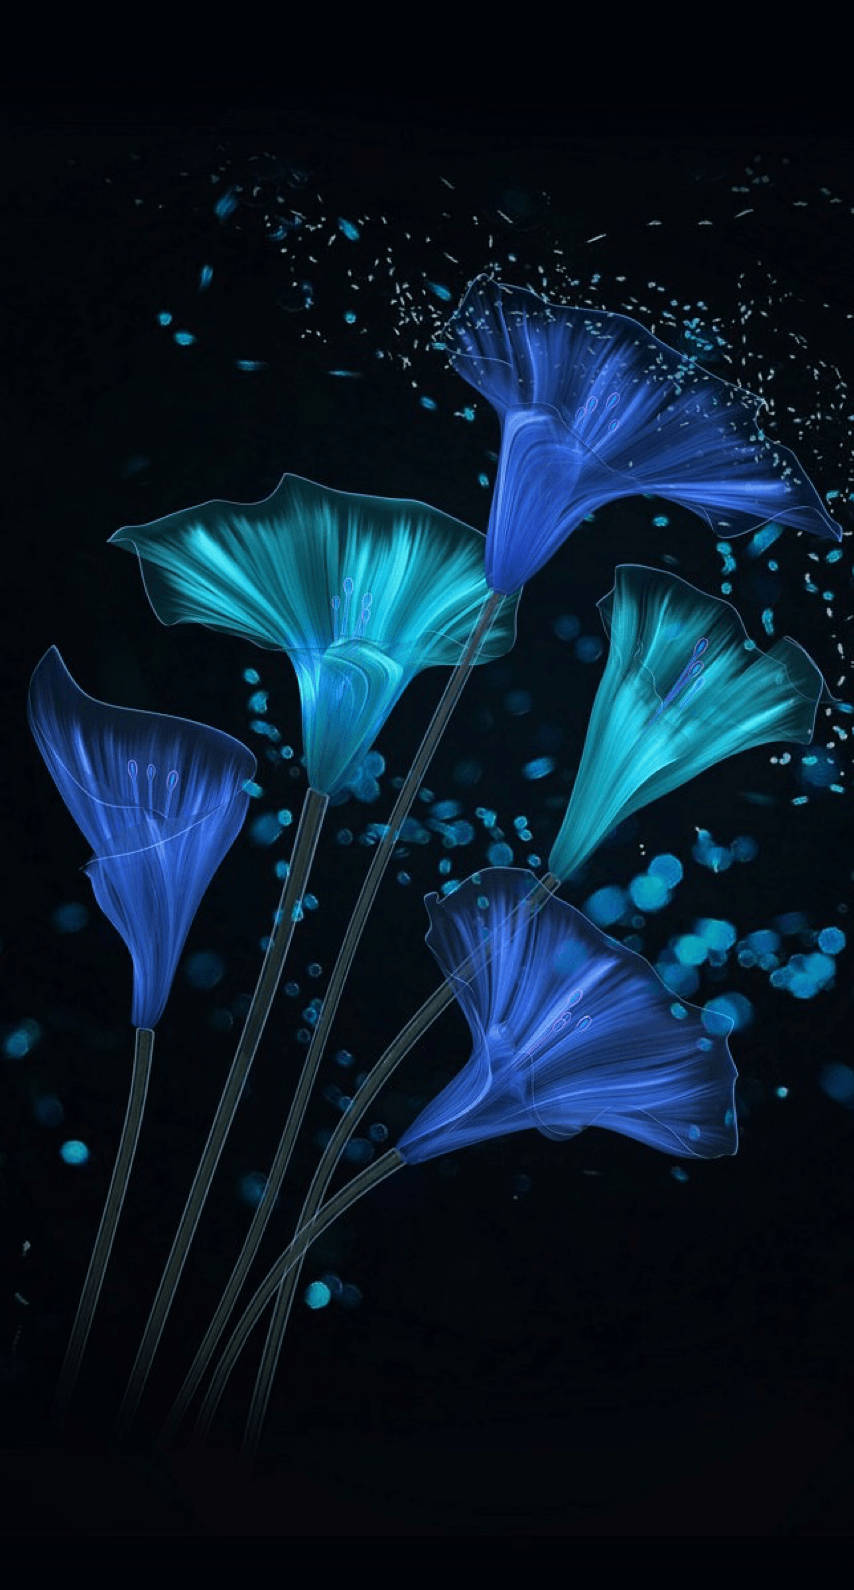 Mobile wallpaper Frame Flower Glow Bright Neon 3D 120552 download  the picture for free